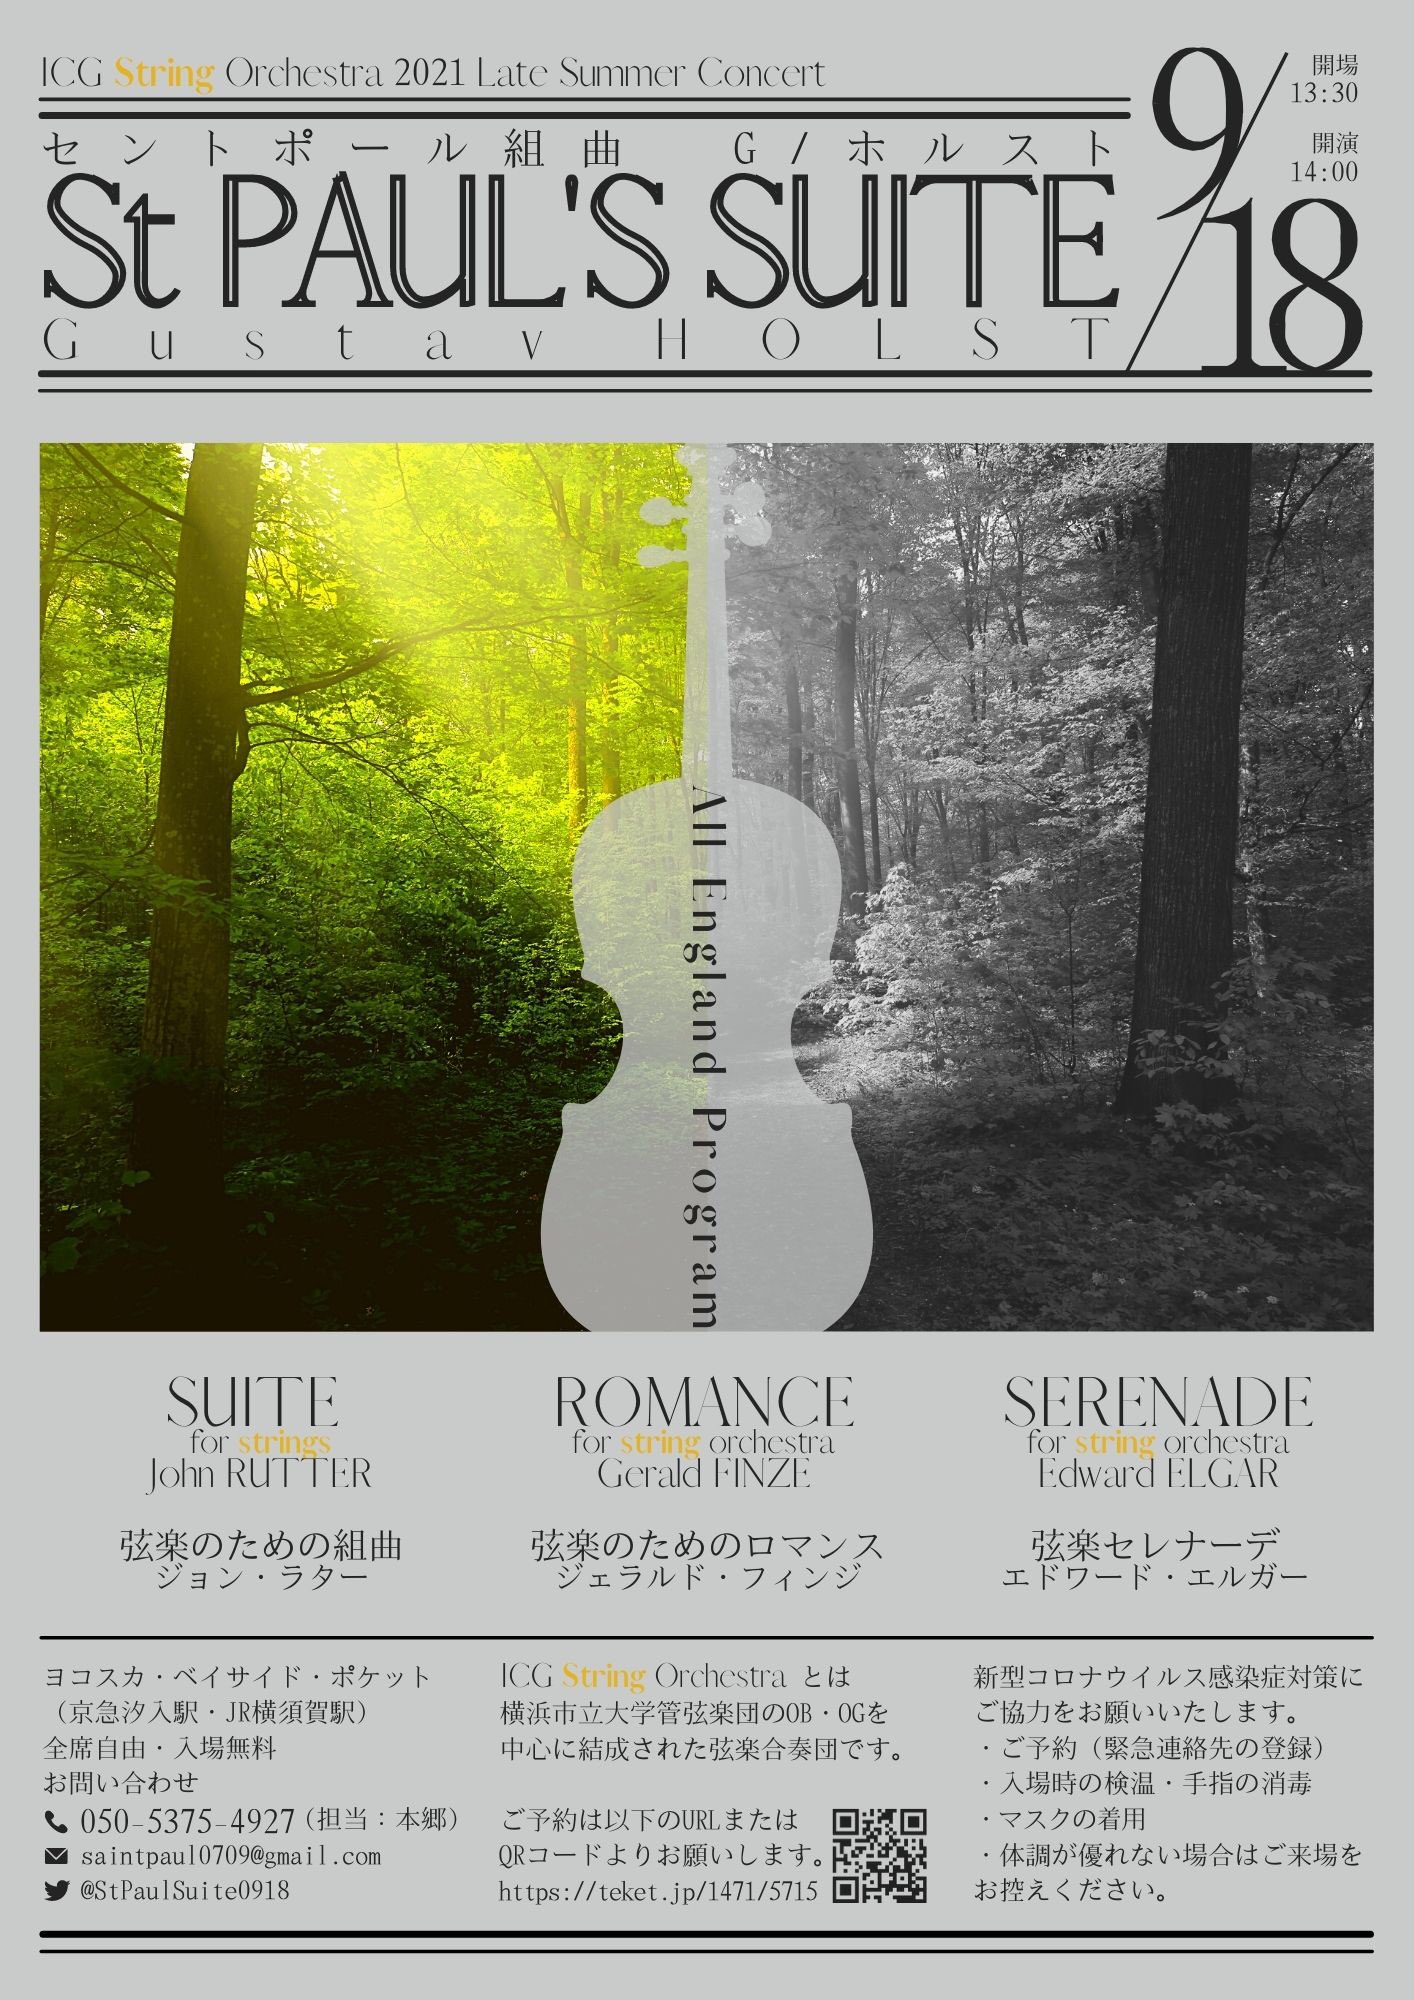 ICG String Orchestra2021 Late Summer Concertのフライヤー画像